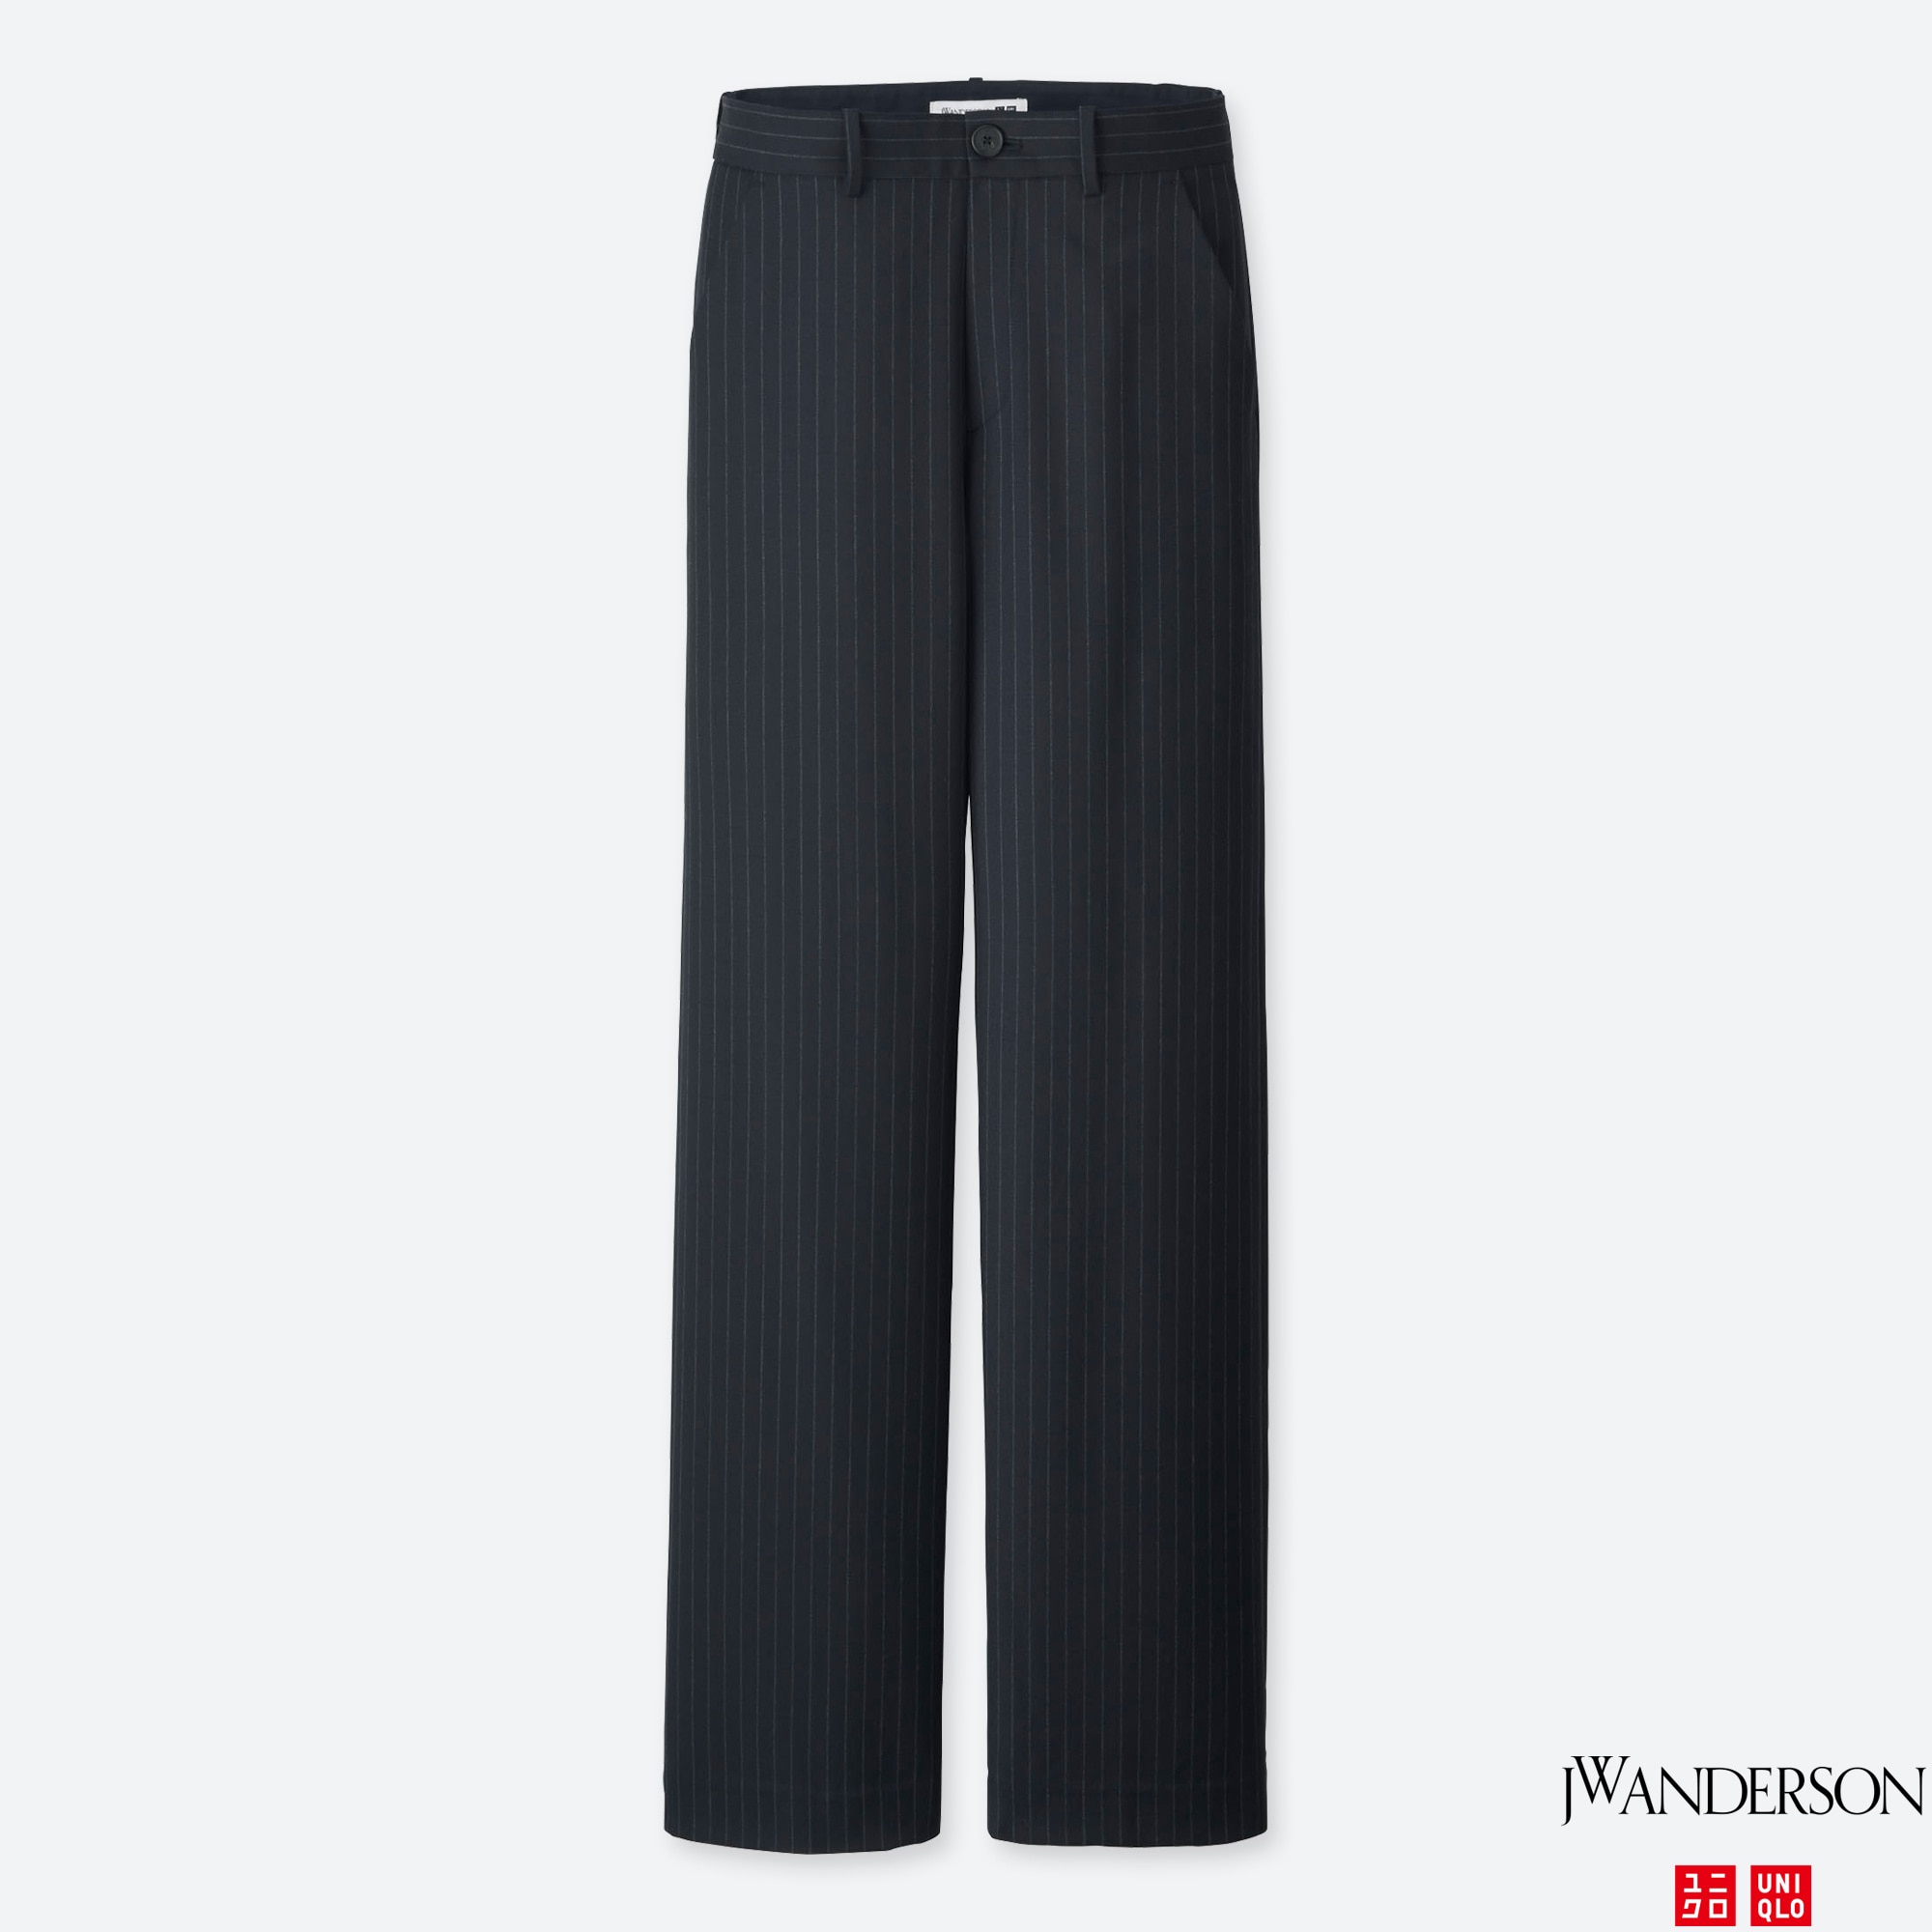 Uniqlo men grey ankle pants/trousers (wool-like), Men's Fashion, Bottoms,  Trousers on Carousell